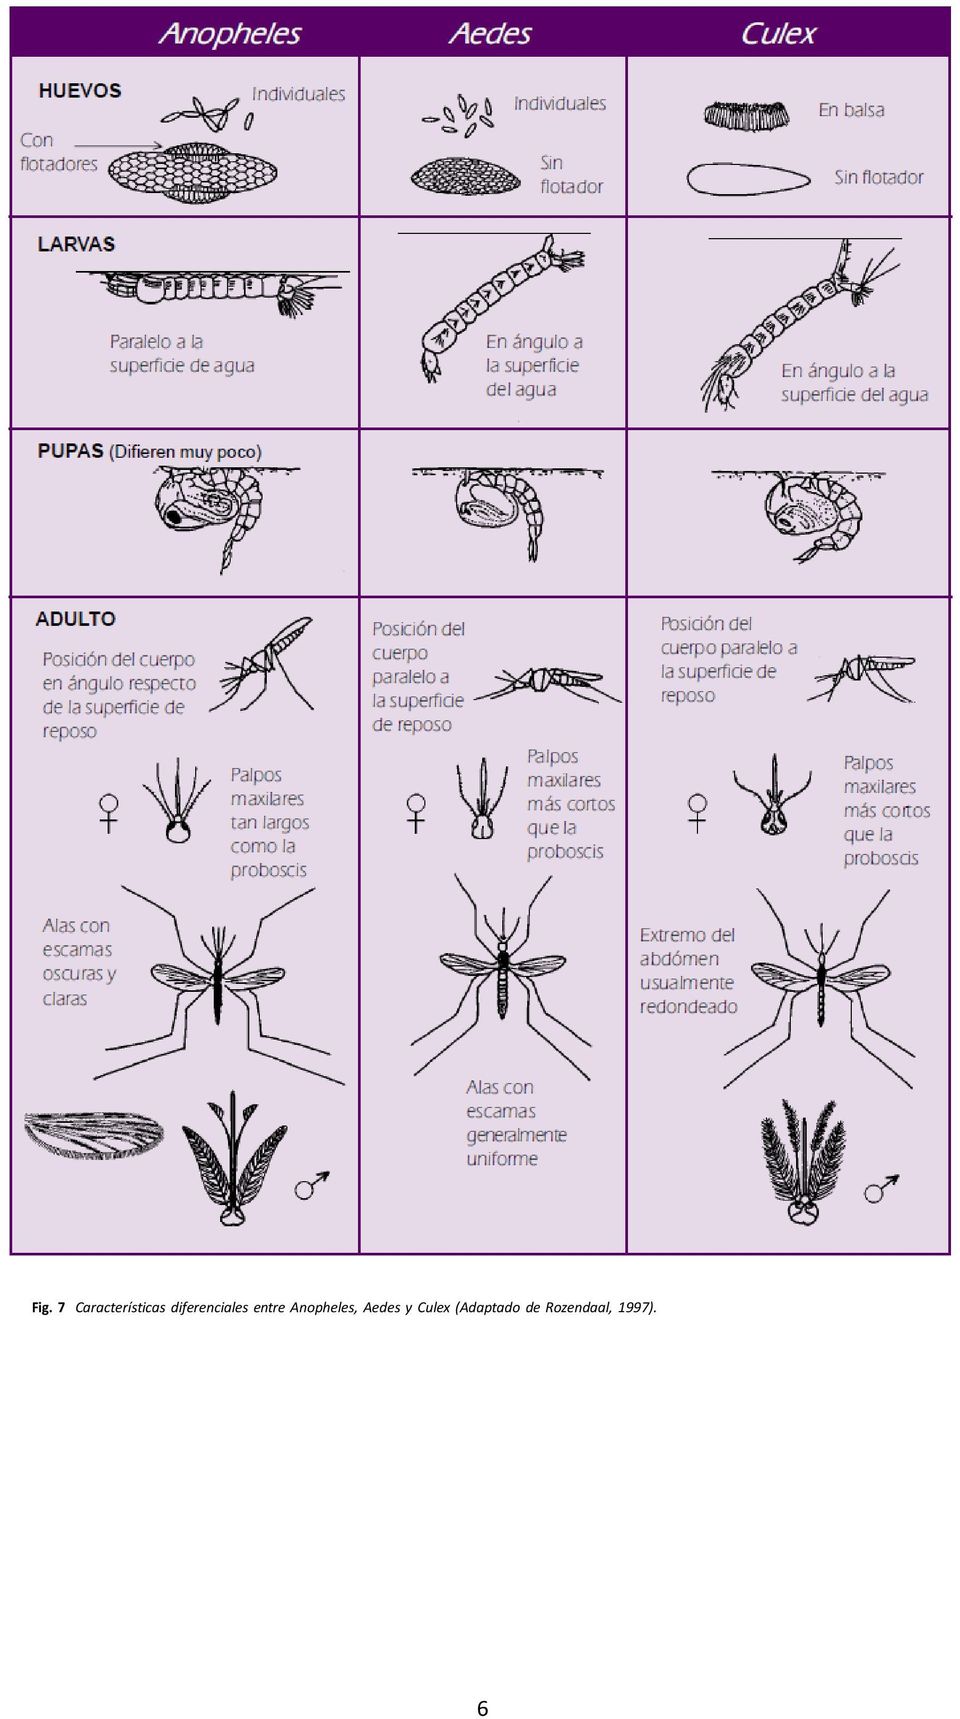 Anopheles, Aedes y Culex